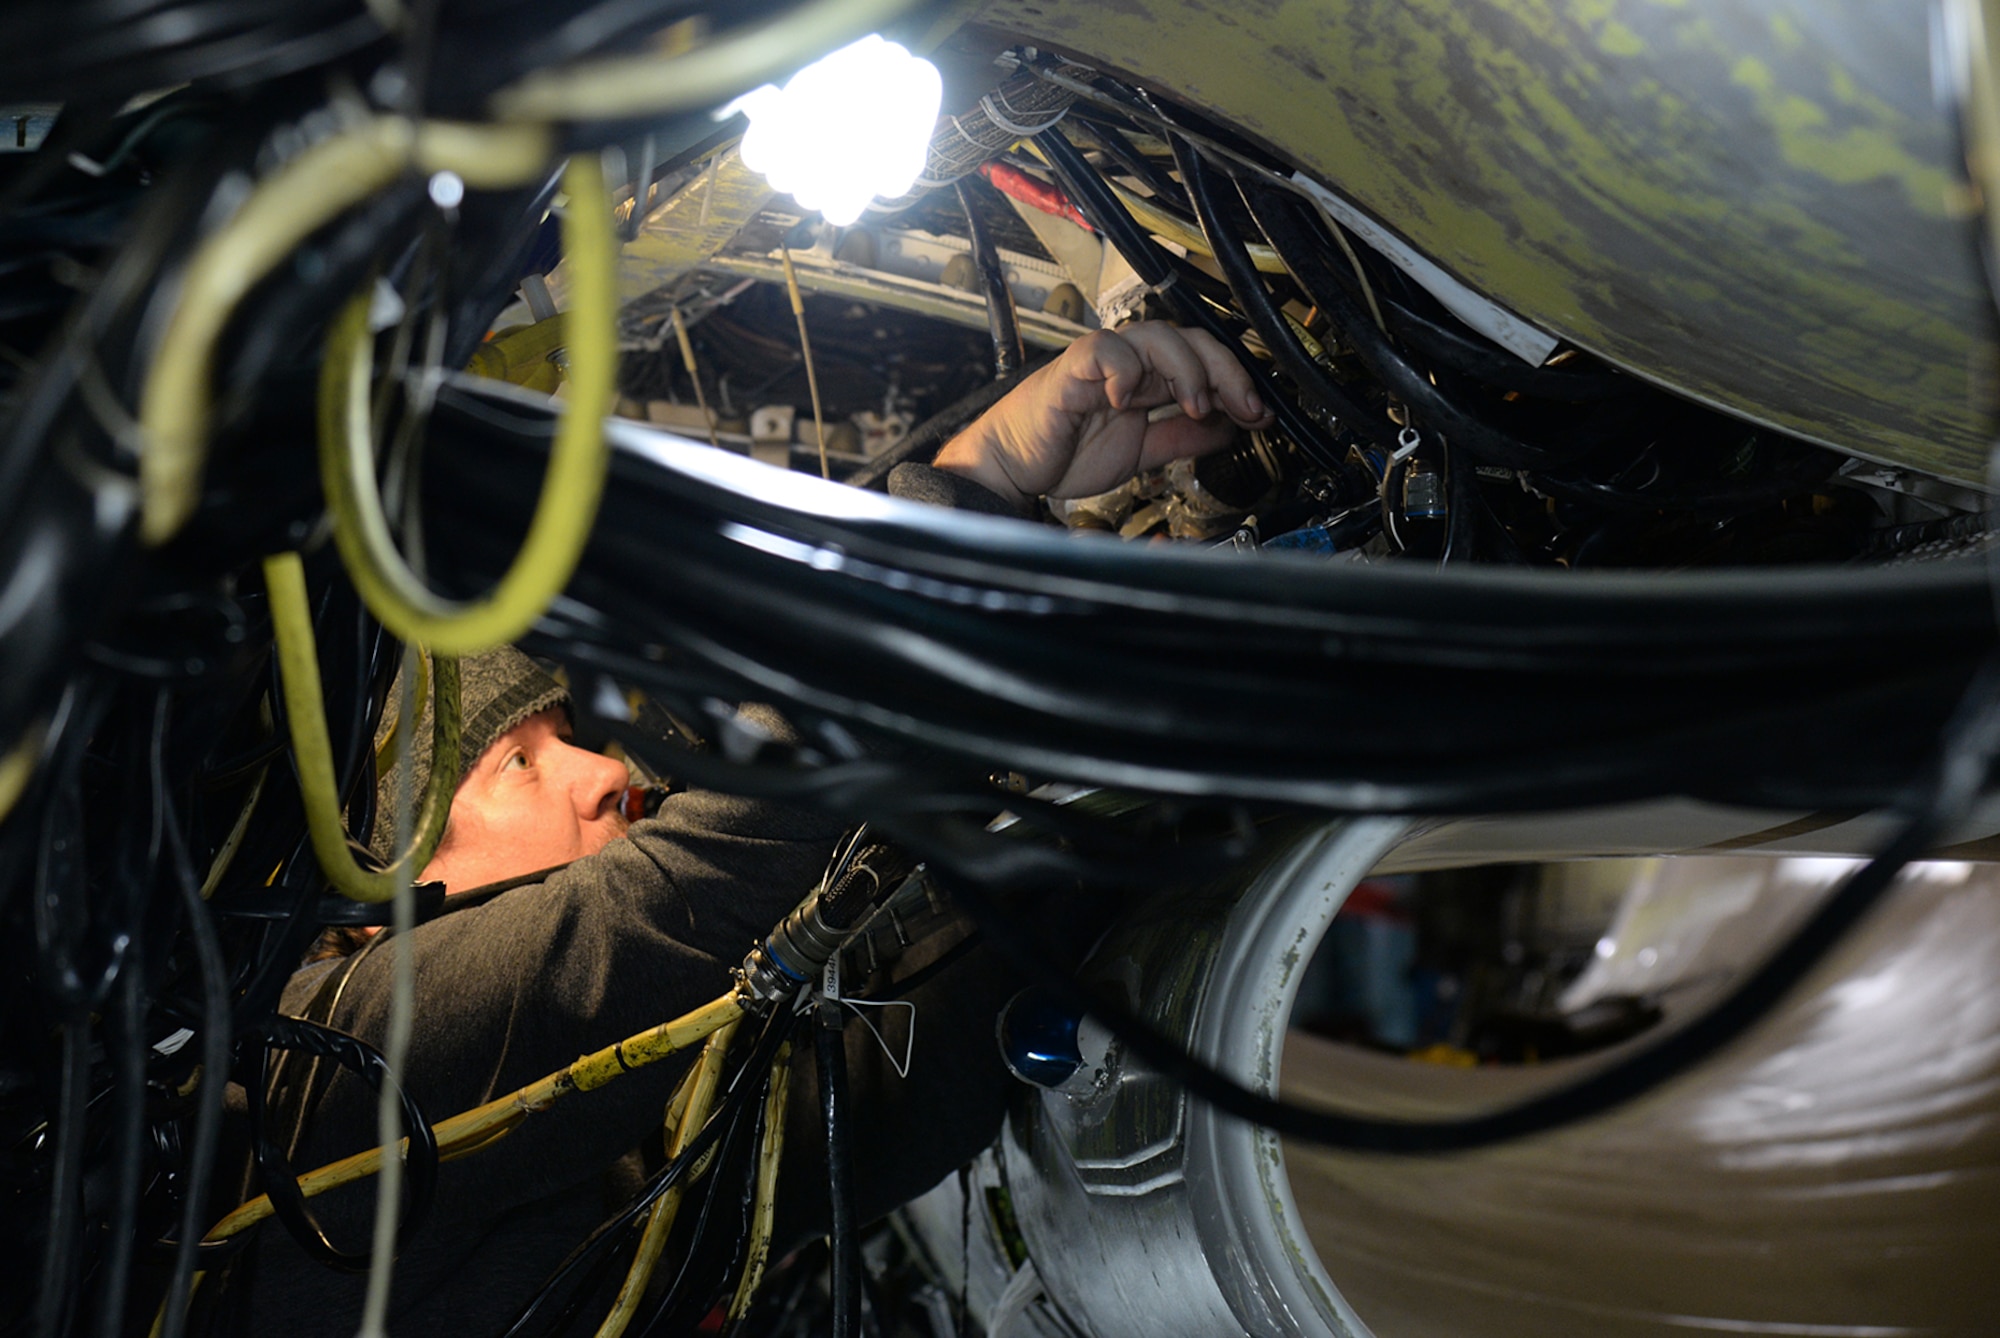 Bret Hadley, 573rd Aircraft Maintenance Squadron, performs an electronic check out on an F-16 undergoing service life extension program modification on Dec. 20, 2017, at Hill Air Force Base, Utah. The SLEP is a series of inspections and modifications taking place at one time to extend the aircraft flying service life to 2046. (U.S. Air Force photo by Alex R. Lloyd)